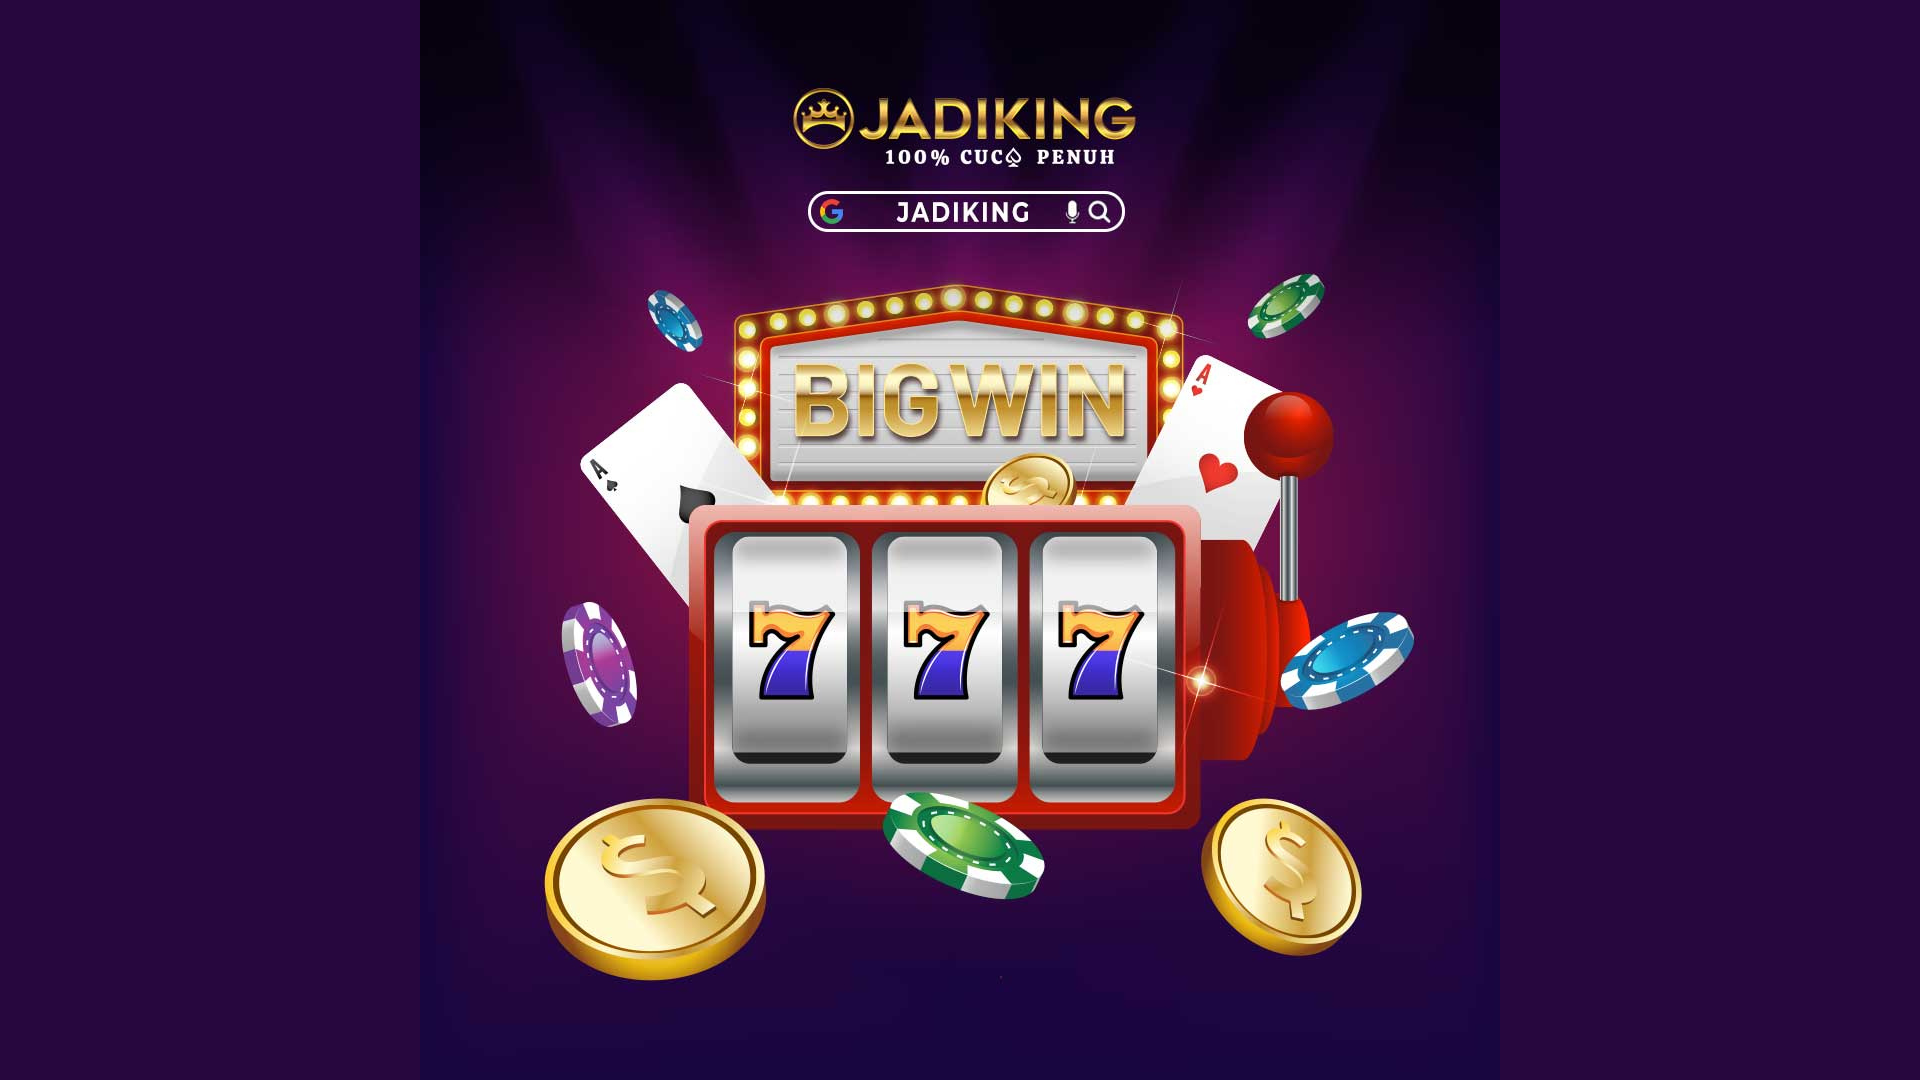 Get RM10 Worth of Free Kredit RM10 in Jadiking88 When You Register Today!